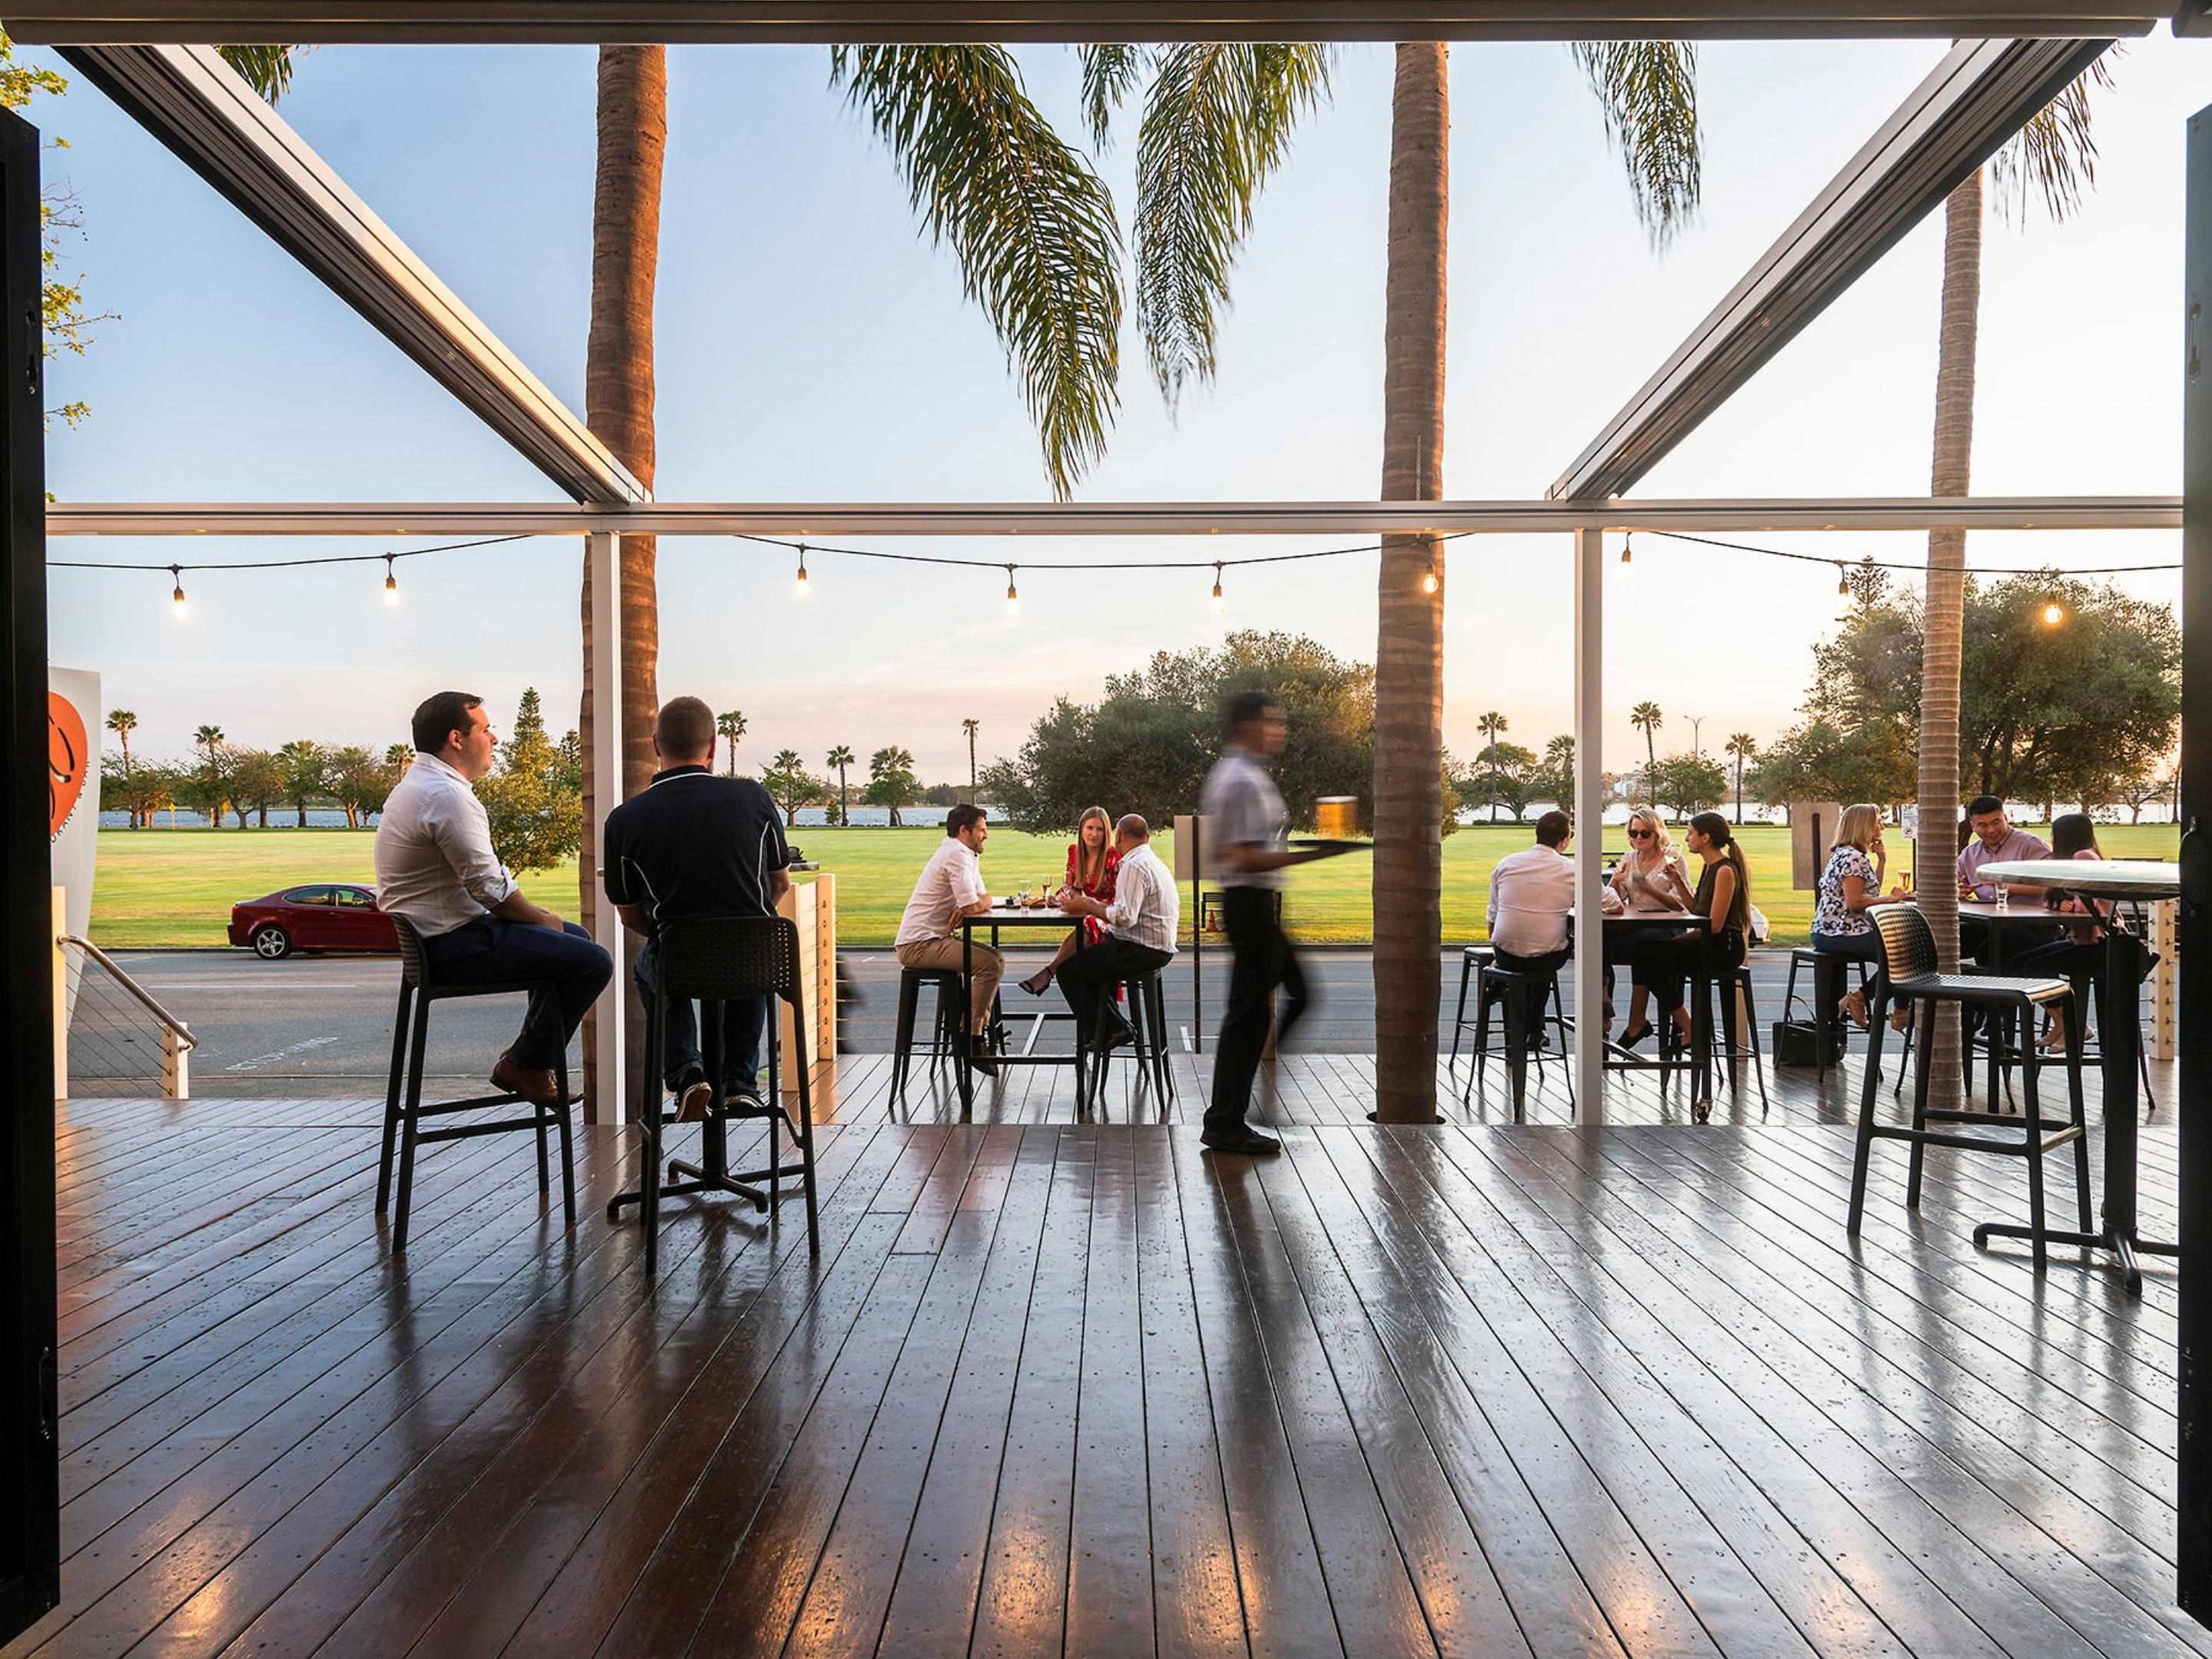 Located at the front of the hotel in East Perth, Gusti has enviable views of the Swan River and a sumptuous modern Australian menu. Local produce is put to work in our seasonal menus which provide a local twist to some international cuisine options to suit every palate.